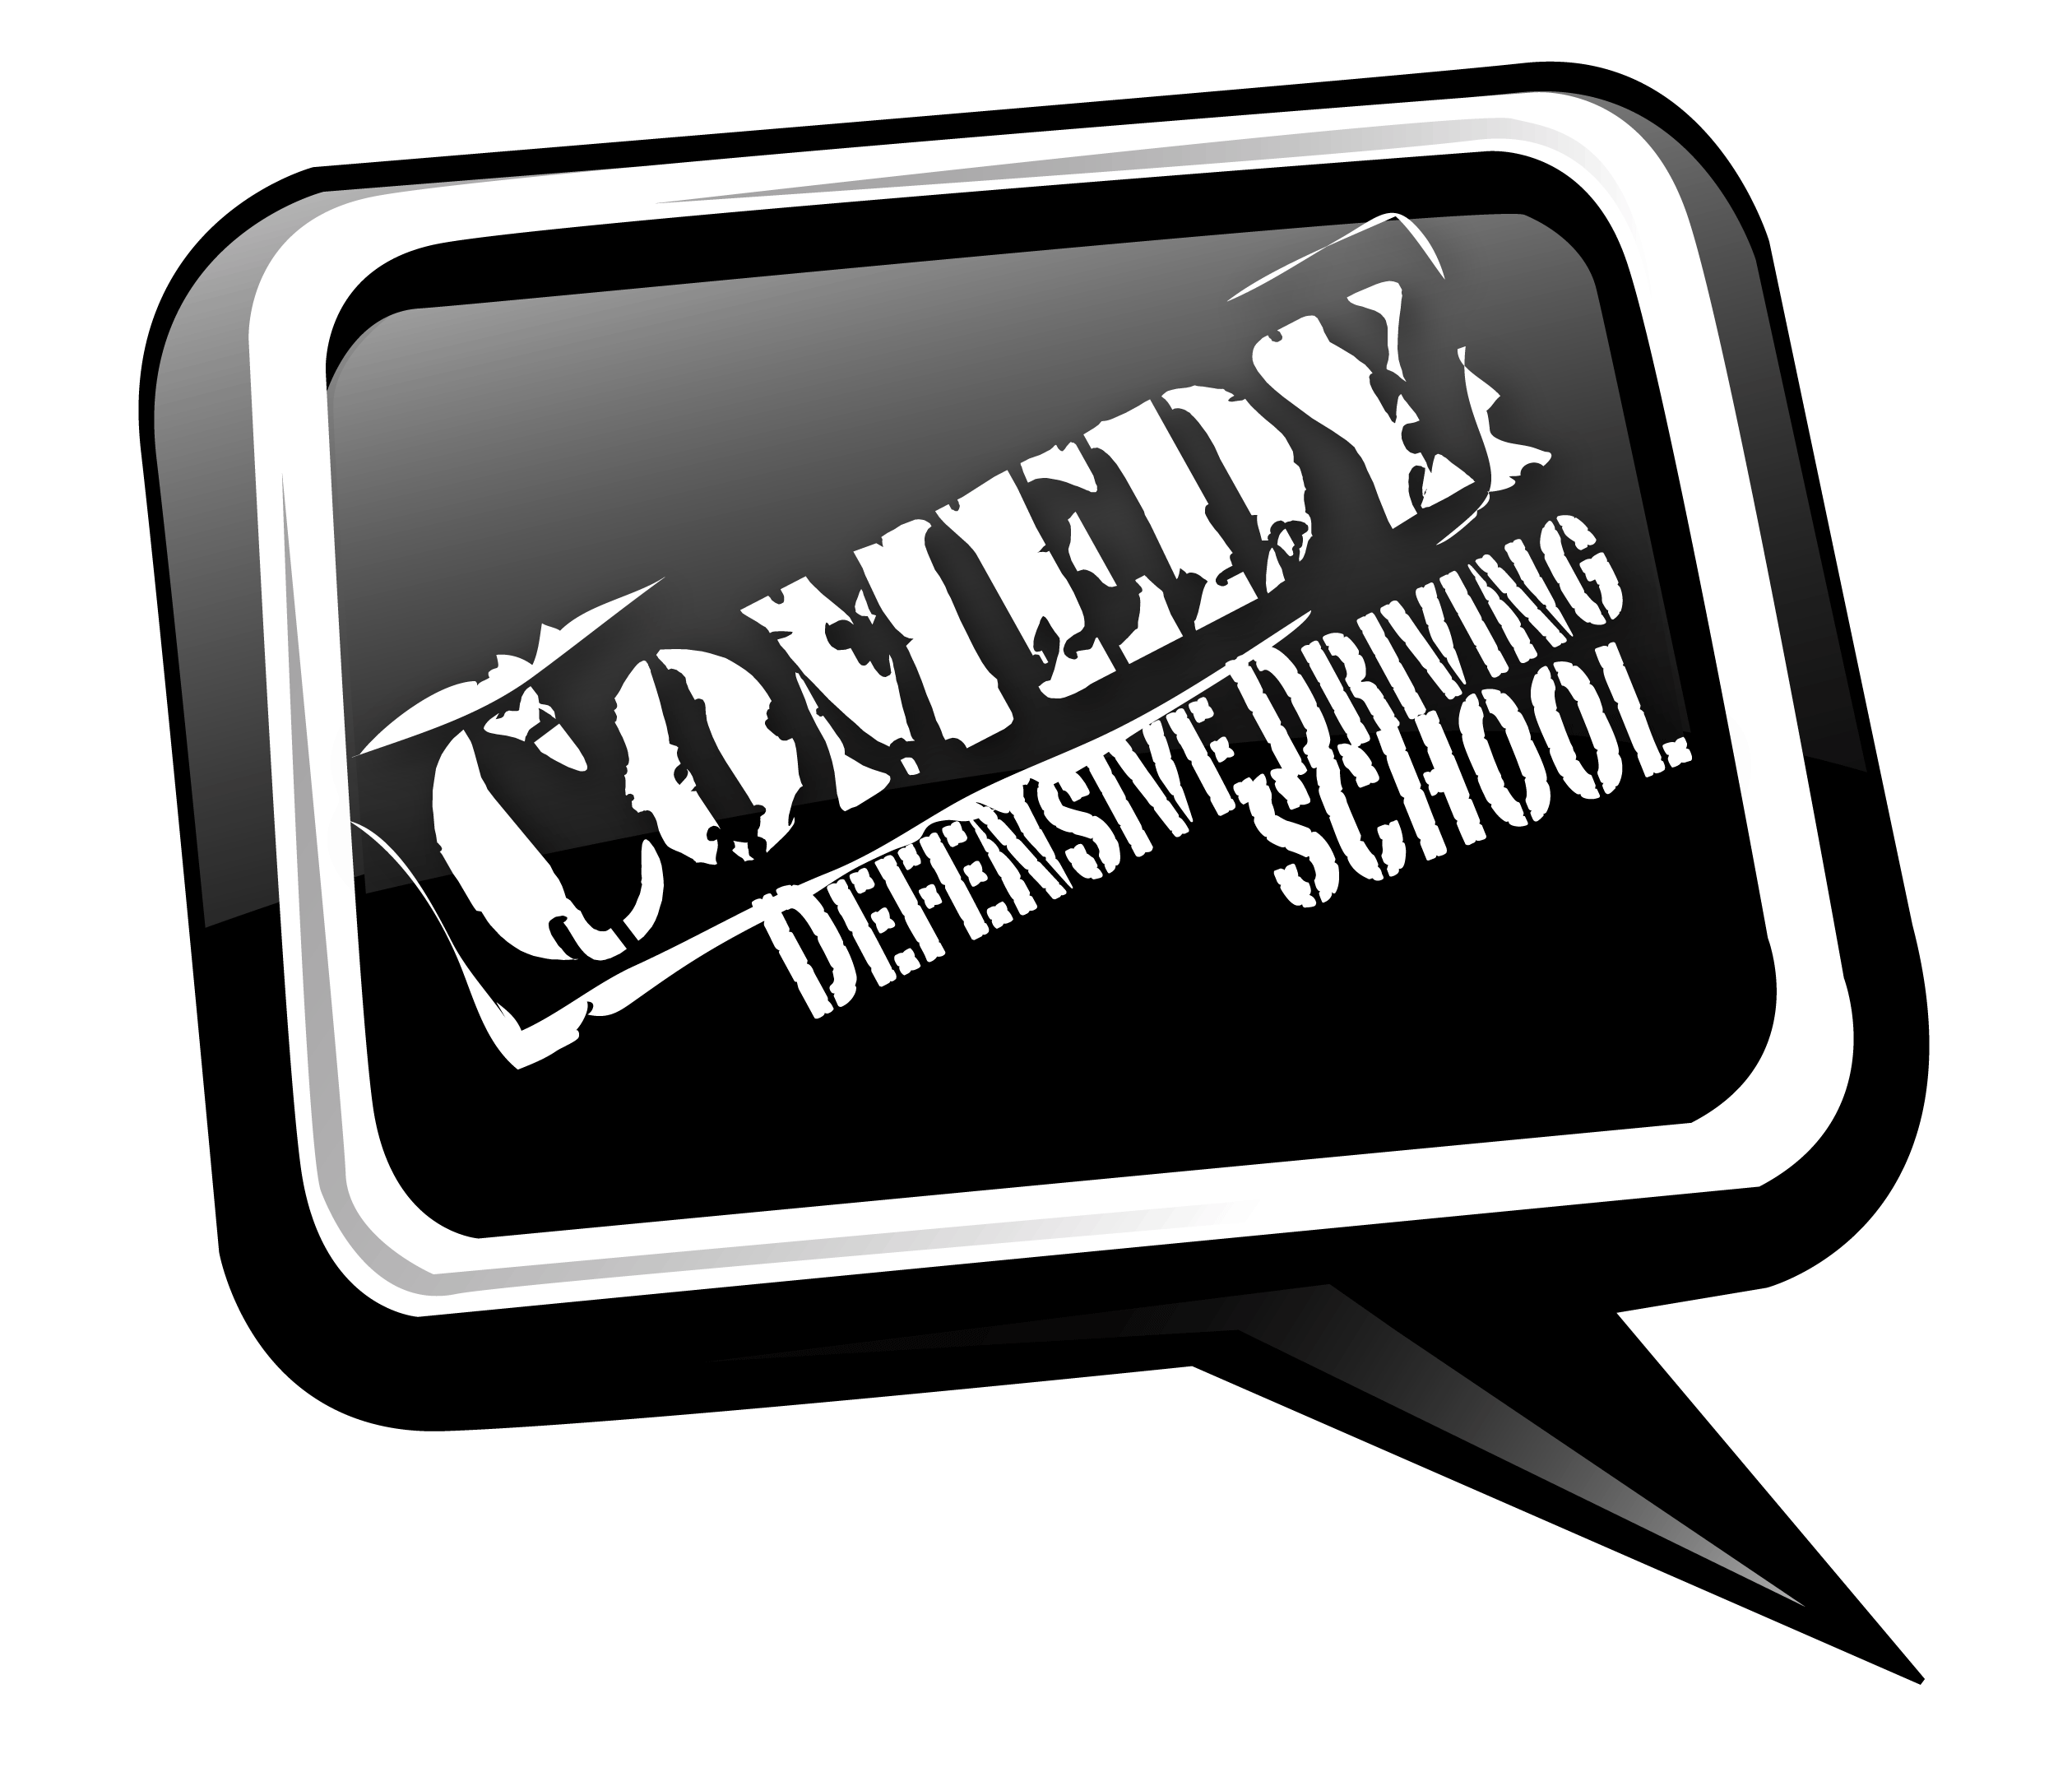 Driving clipart driver education. Comedy defensive school launches